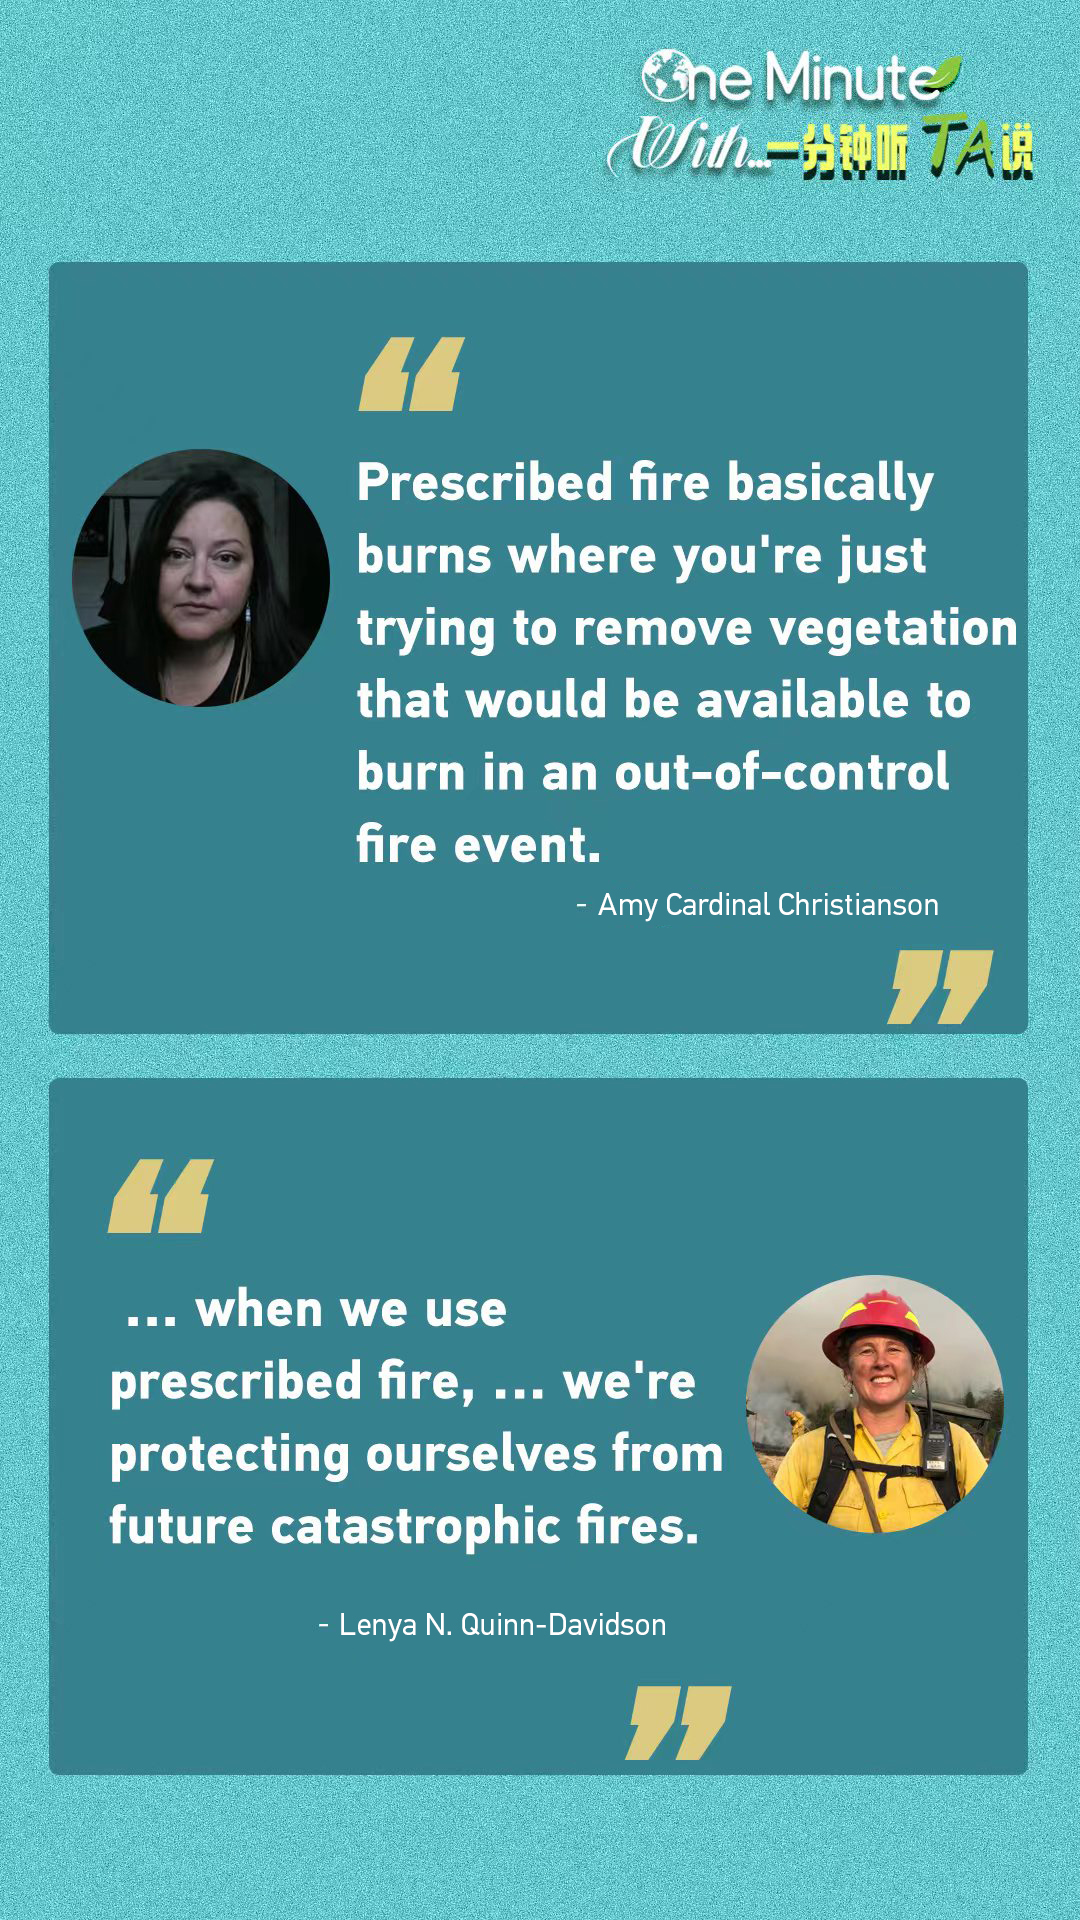 One Minute With: Prescribed burns can prevent wildfires but require careful planning